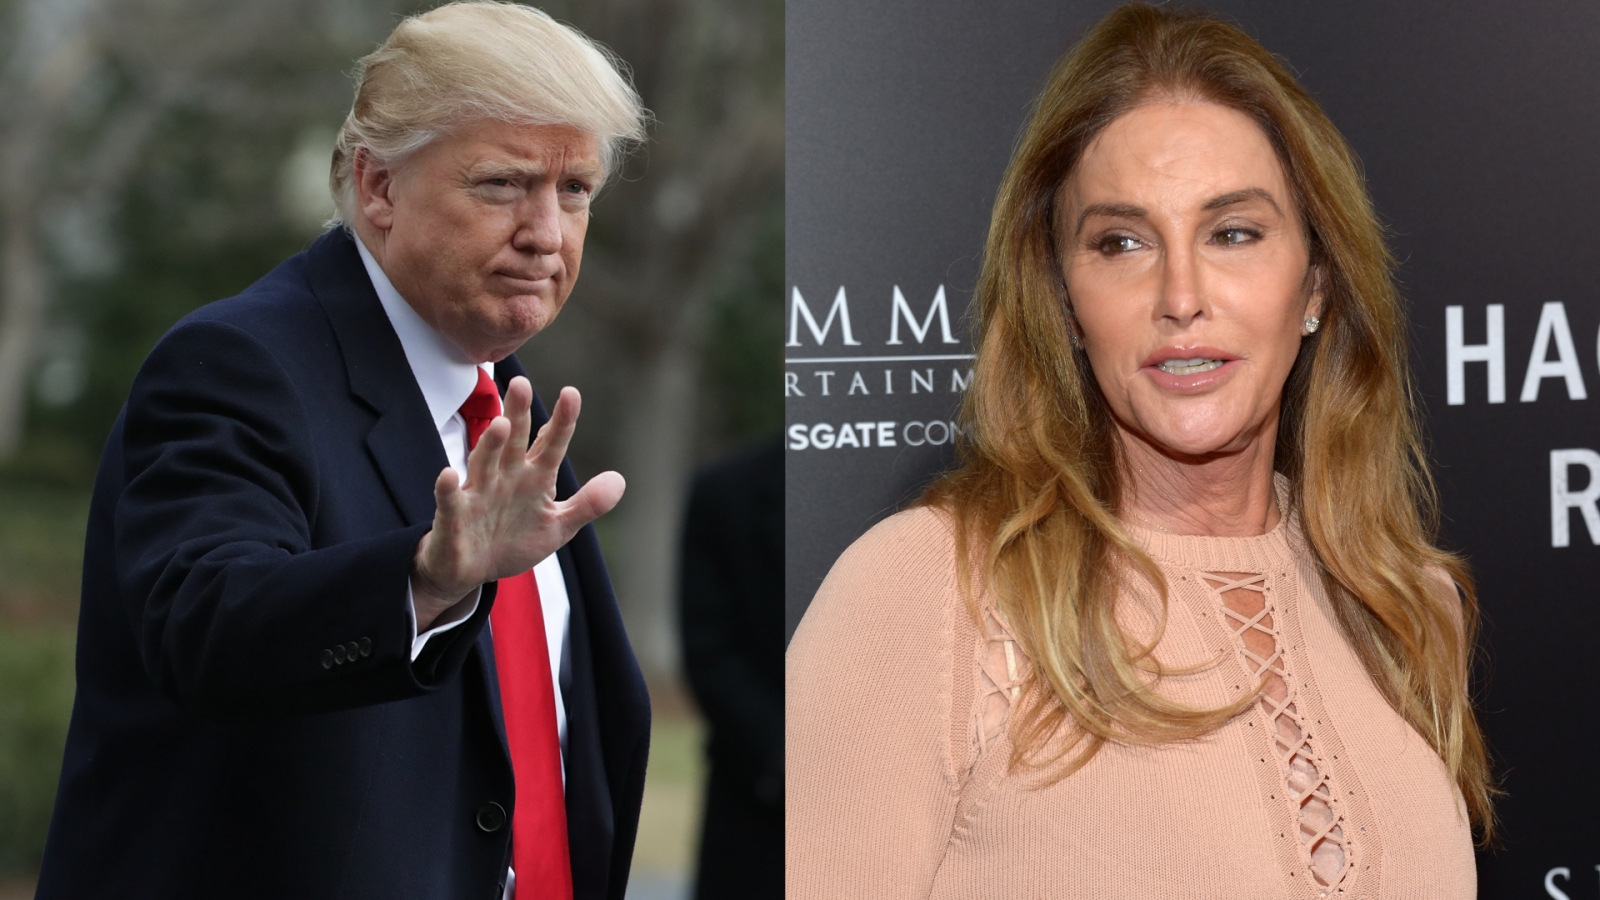 Caitlyn Jenner tells Donald Trump to call her over transgender bathrooms 'disaster'